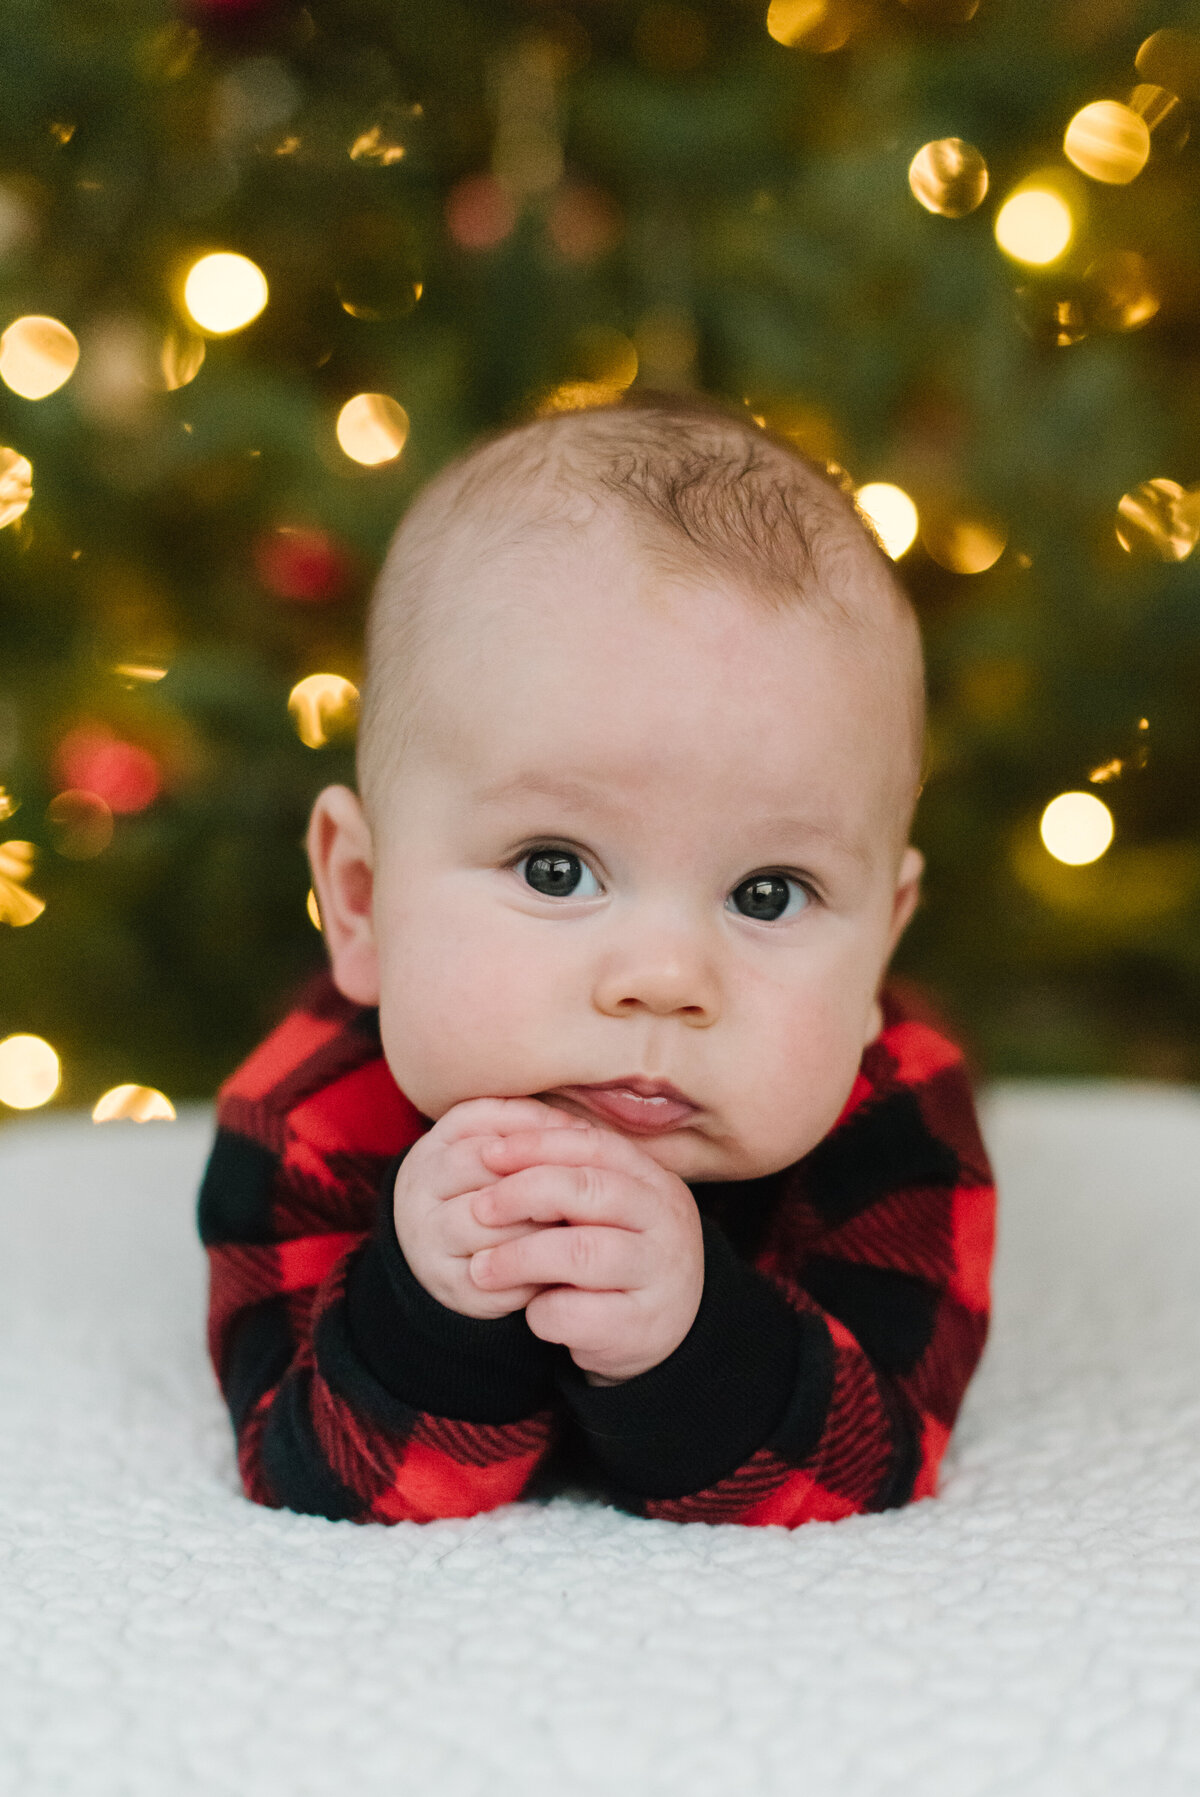 Baby laying down on white rug in front of Christmas tree